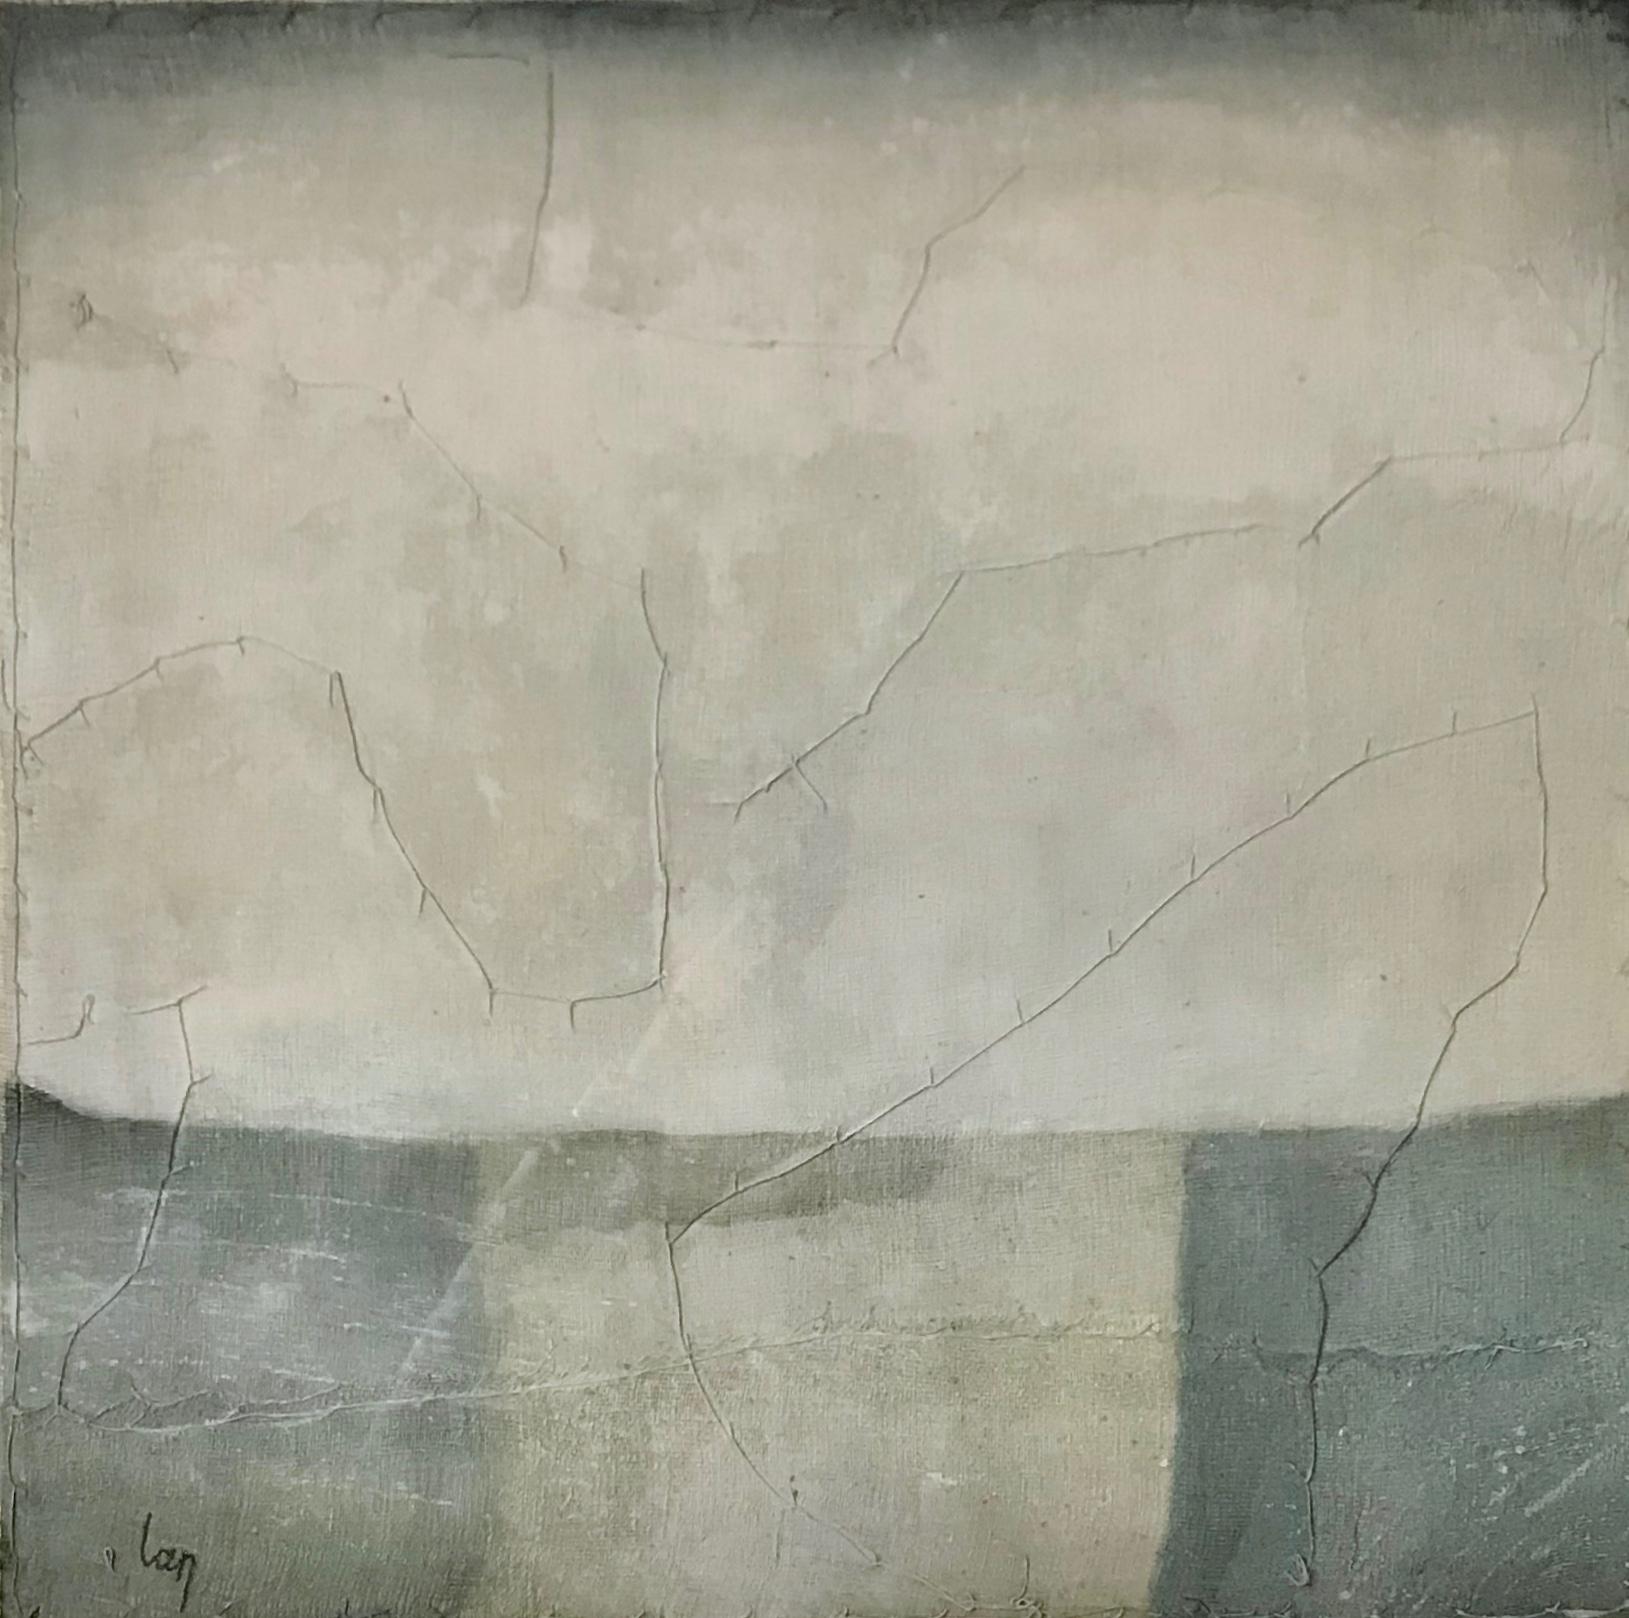 Contemporary abstract painting by Belgian artist Diane Petry.
The artist creates her own three layer canvas using pima cotton, gauze and fine paper. Raw edges and extra thread add texture.
The colors in this painting are white with shades of